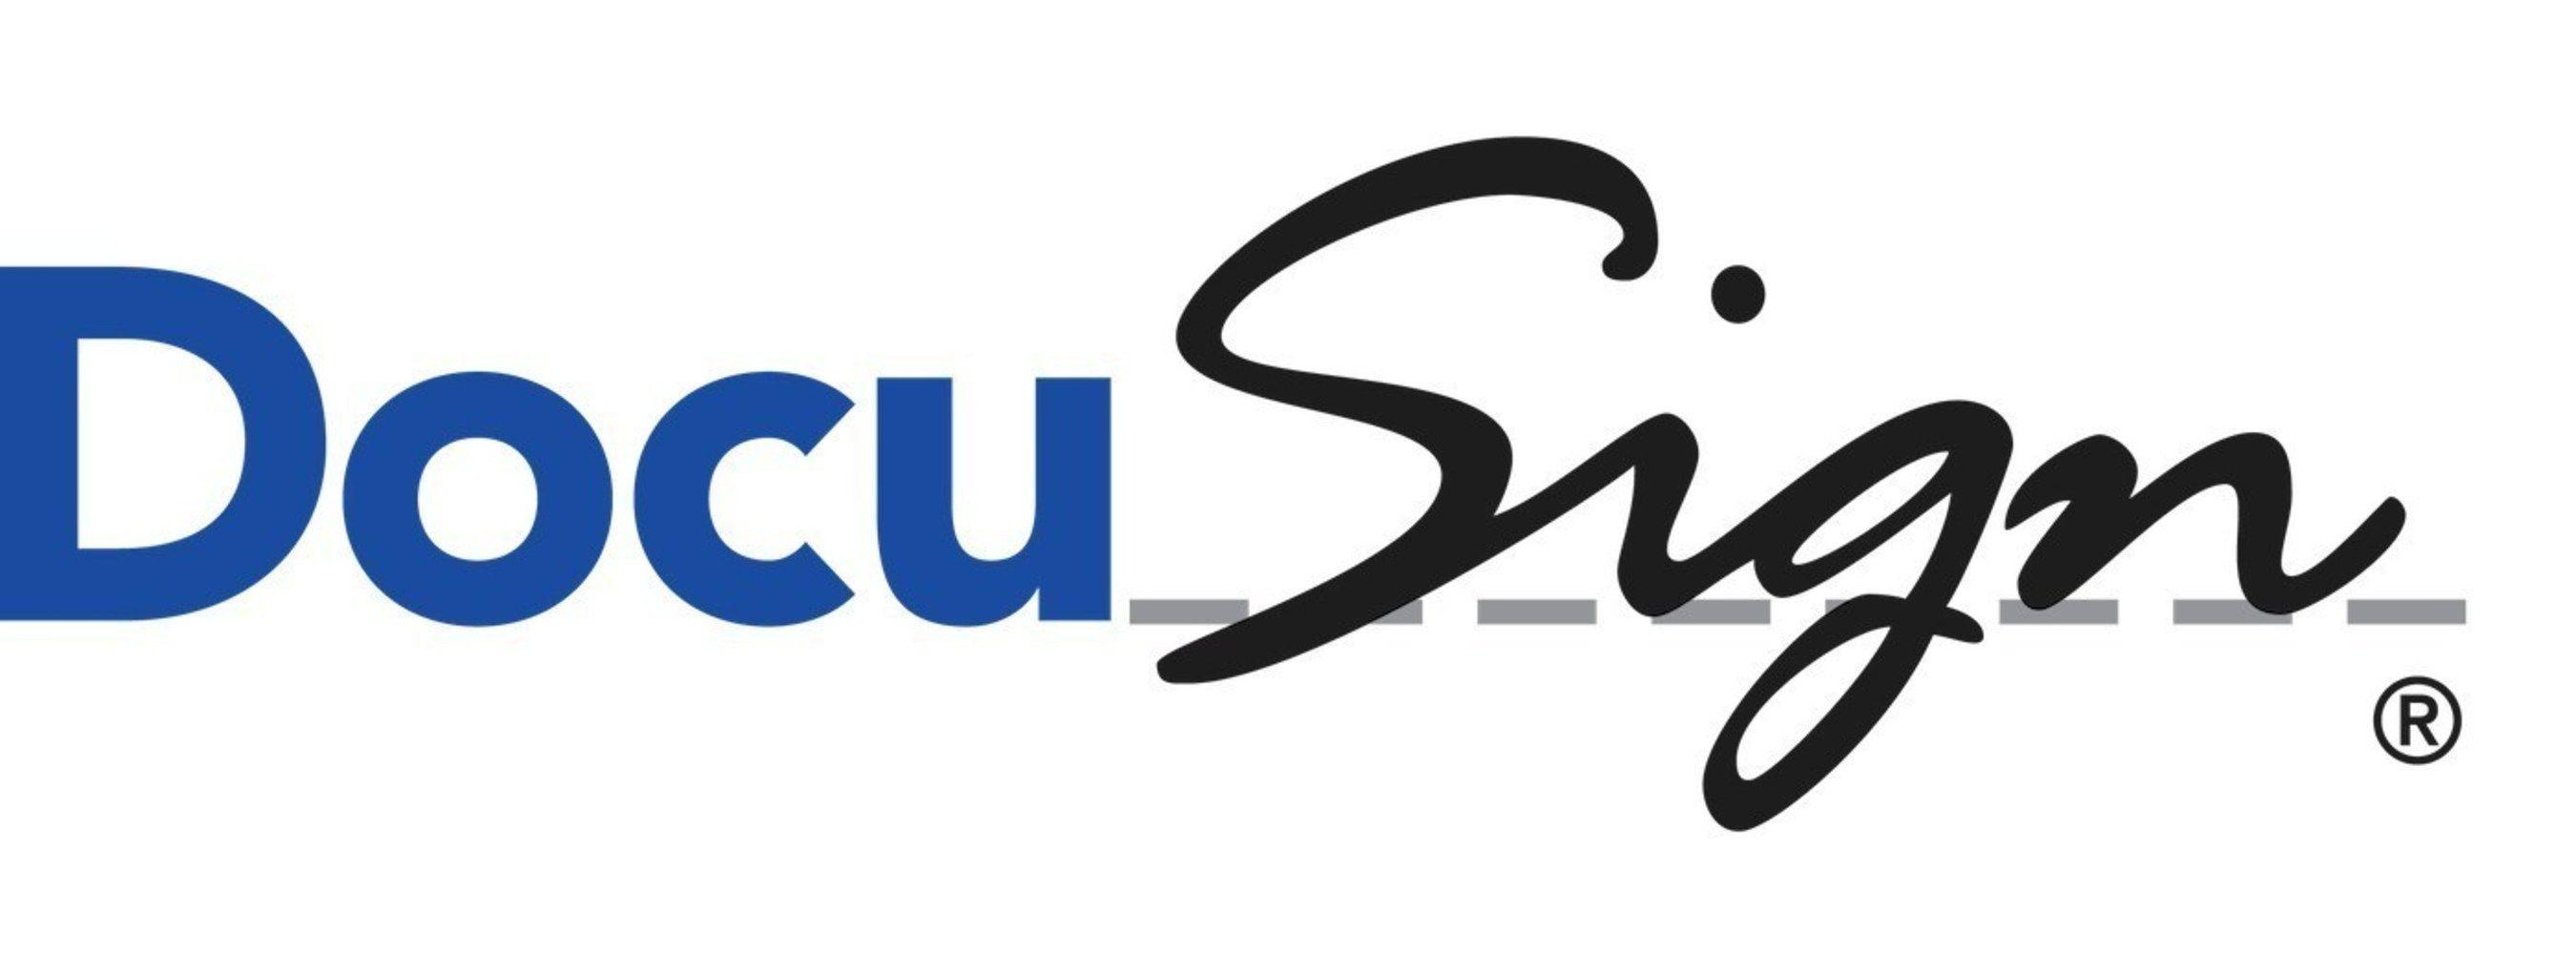 Yoy Logo - DocuSign Global Trust Network Accelerates with 125% YOY Customer Growth